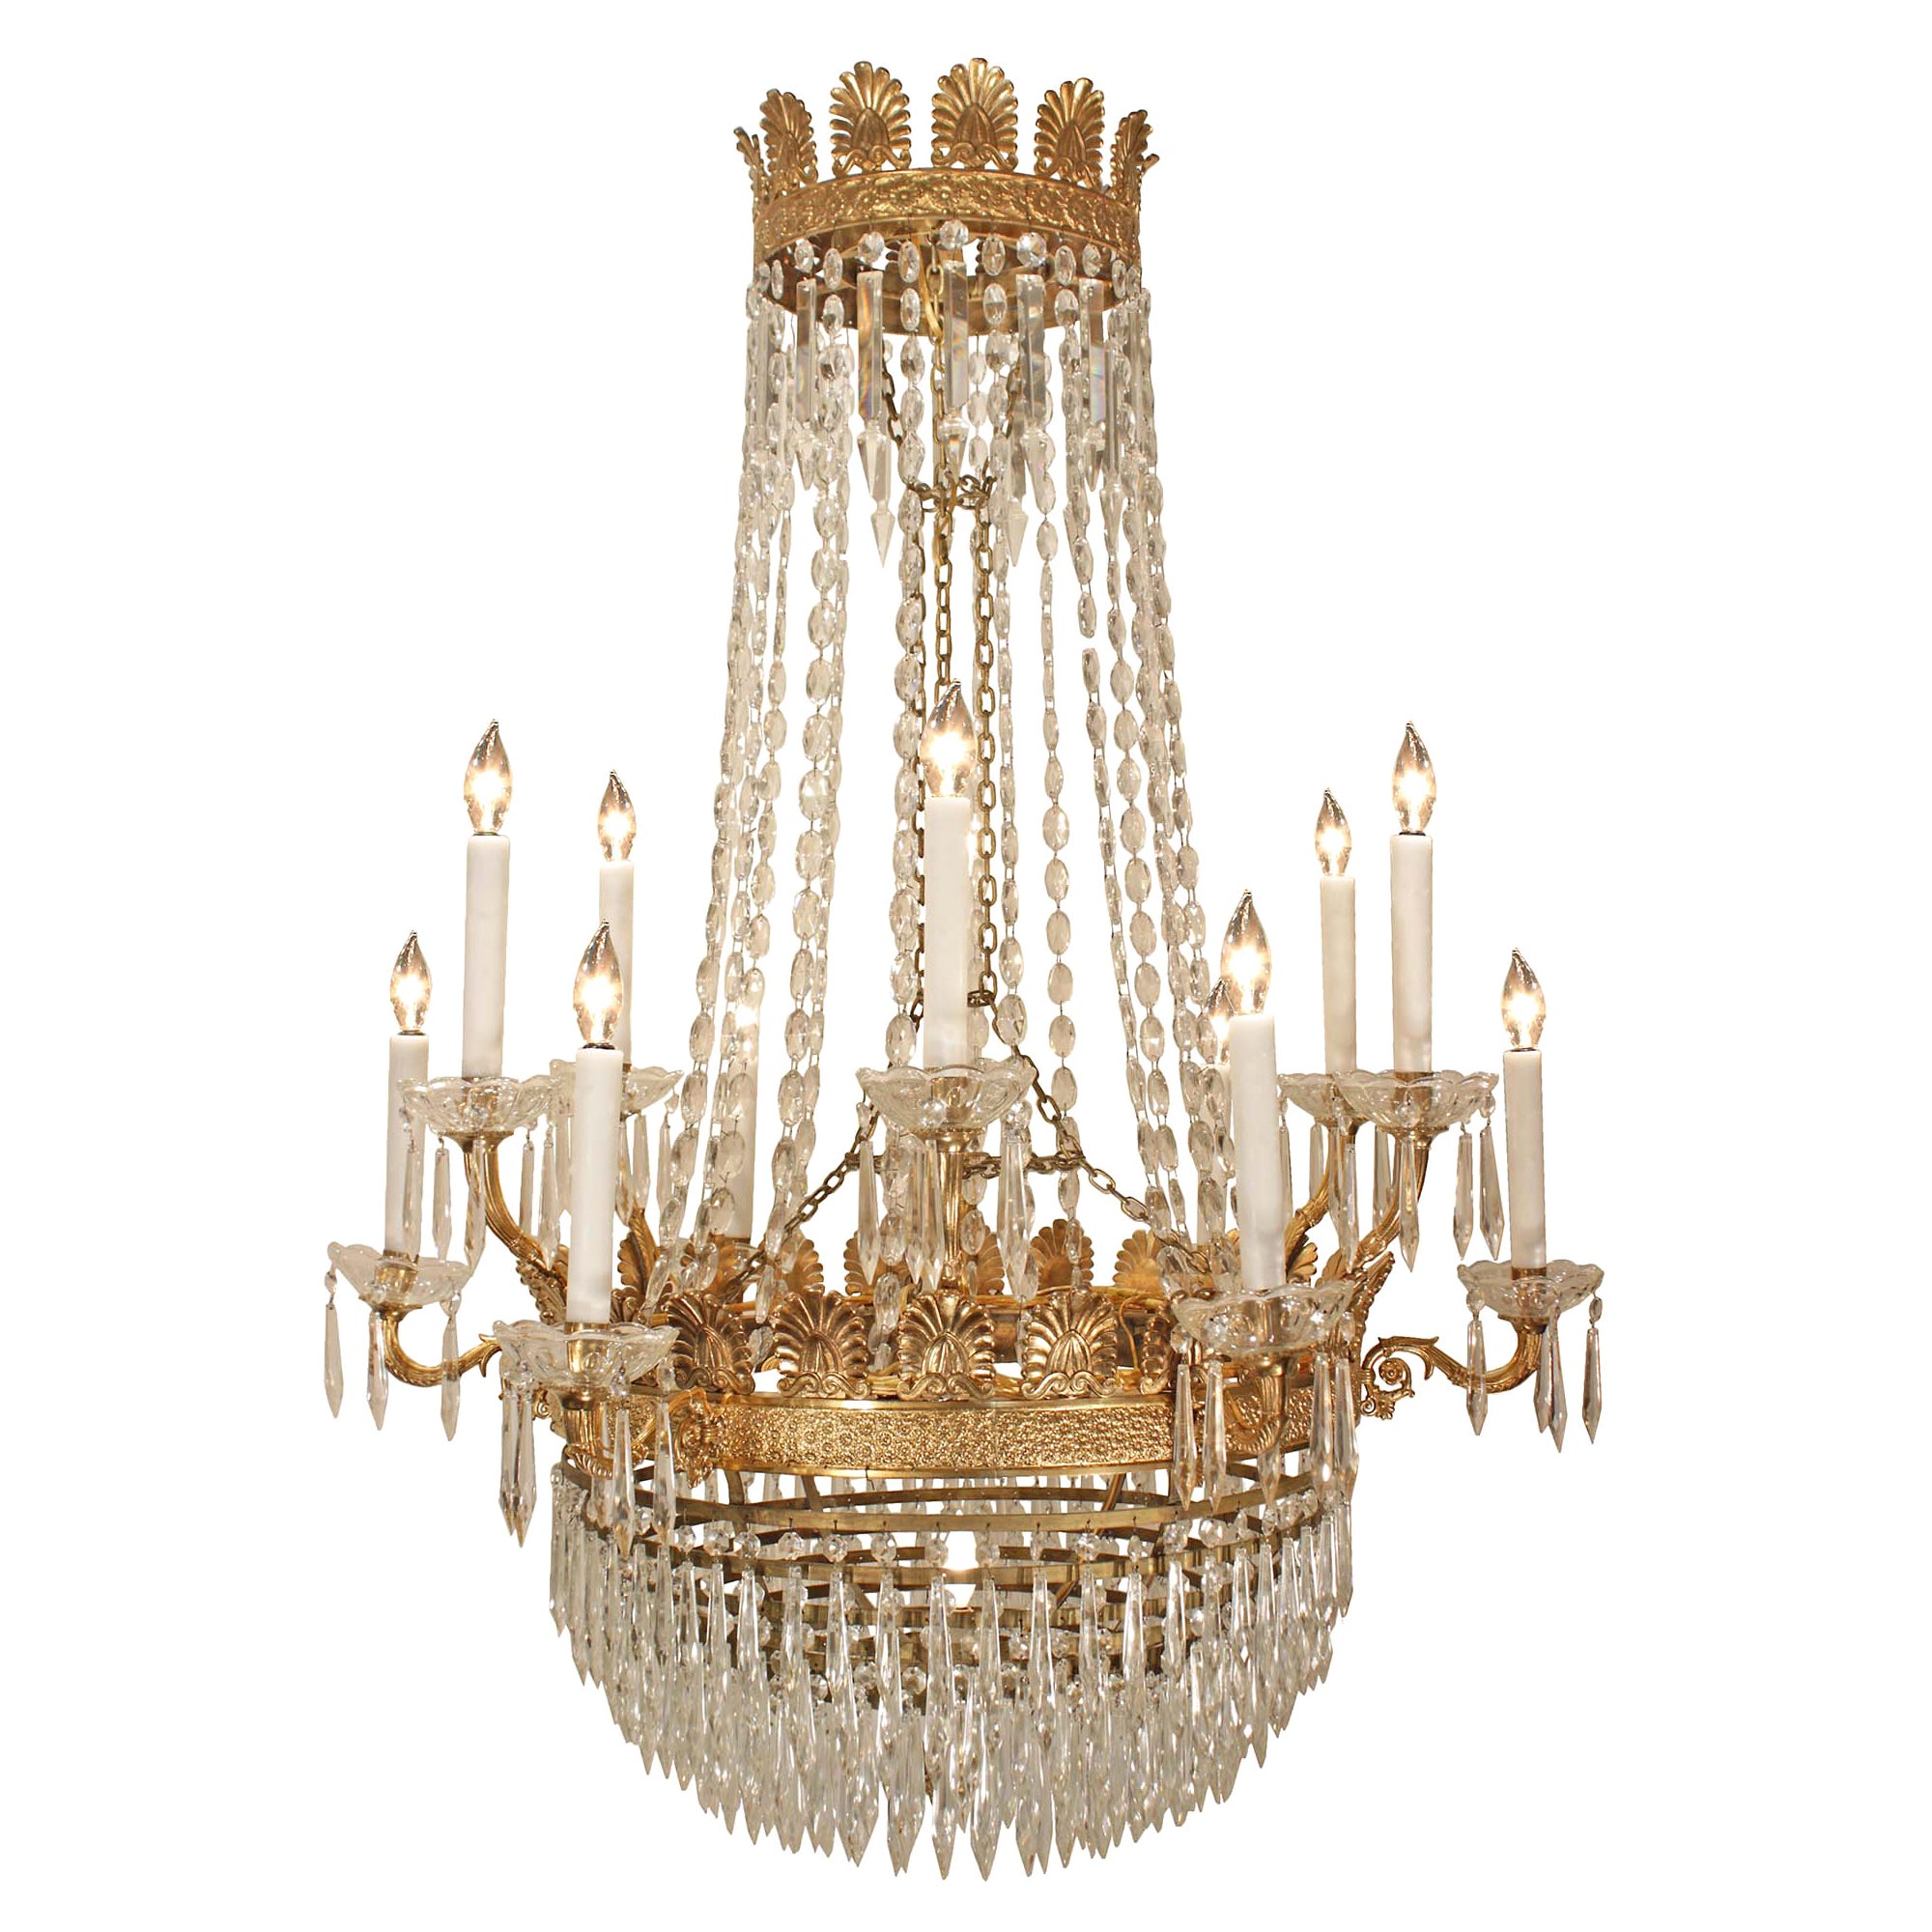 French 19th Century Neoclassical Style Crystal and Ormolu Chandelier For Sale